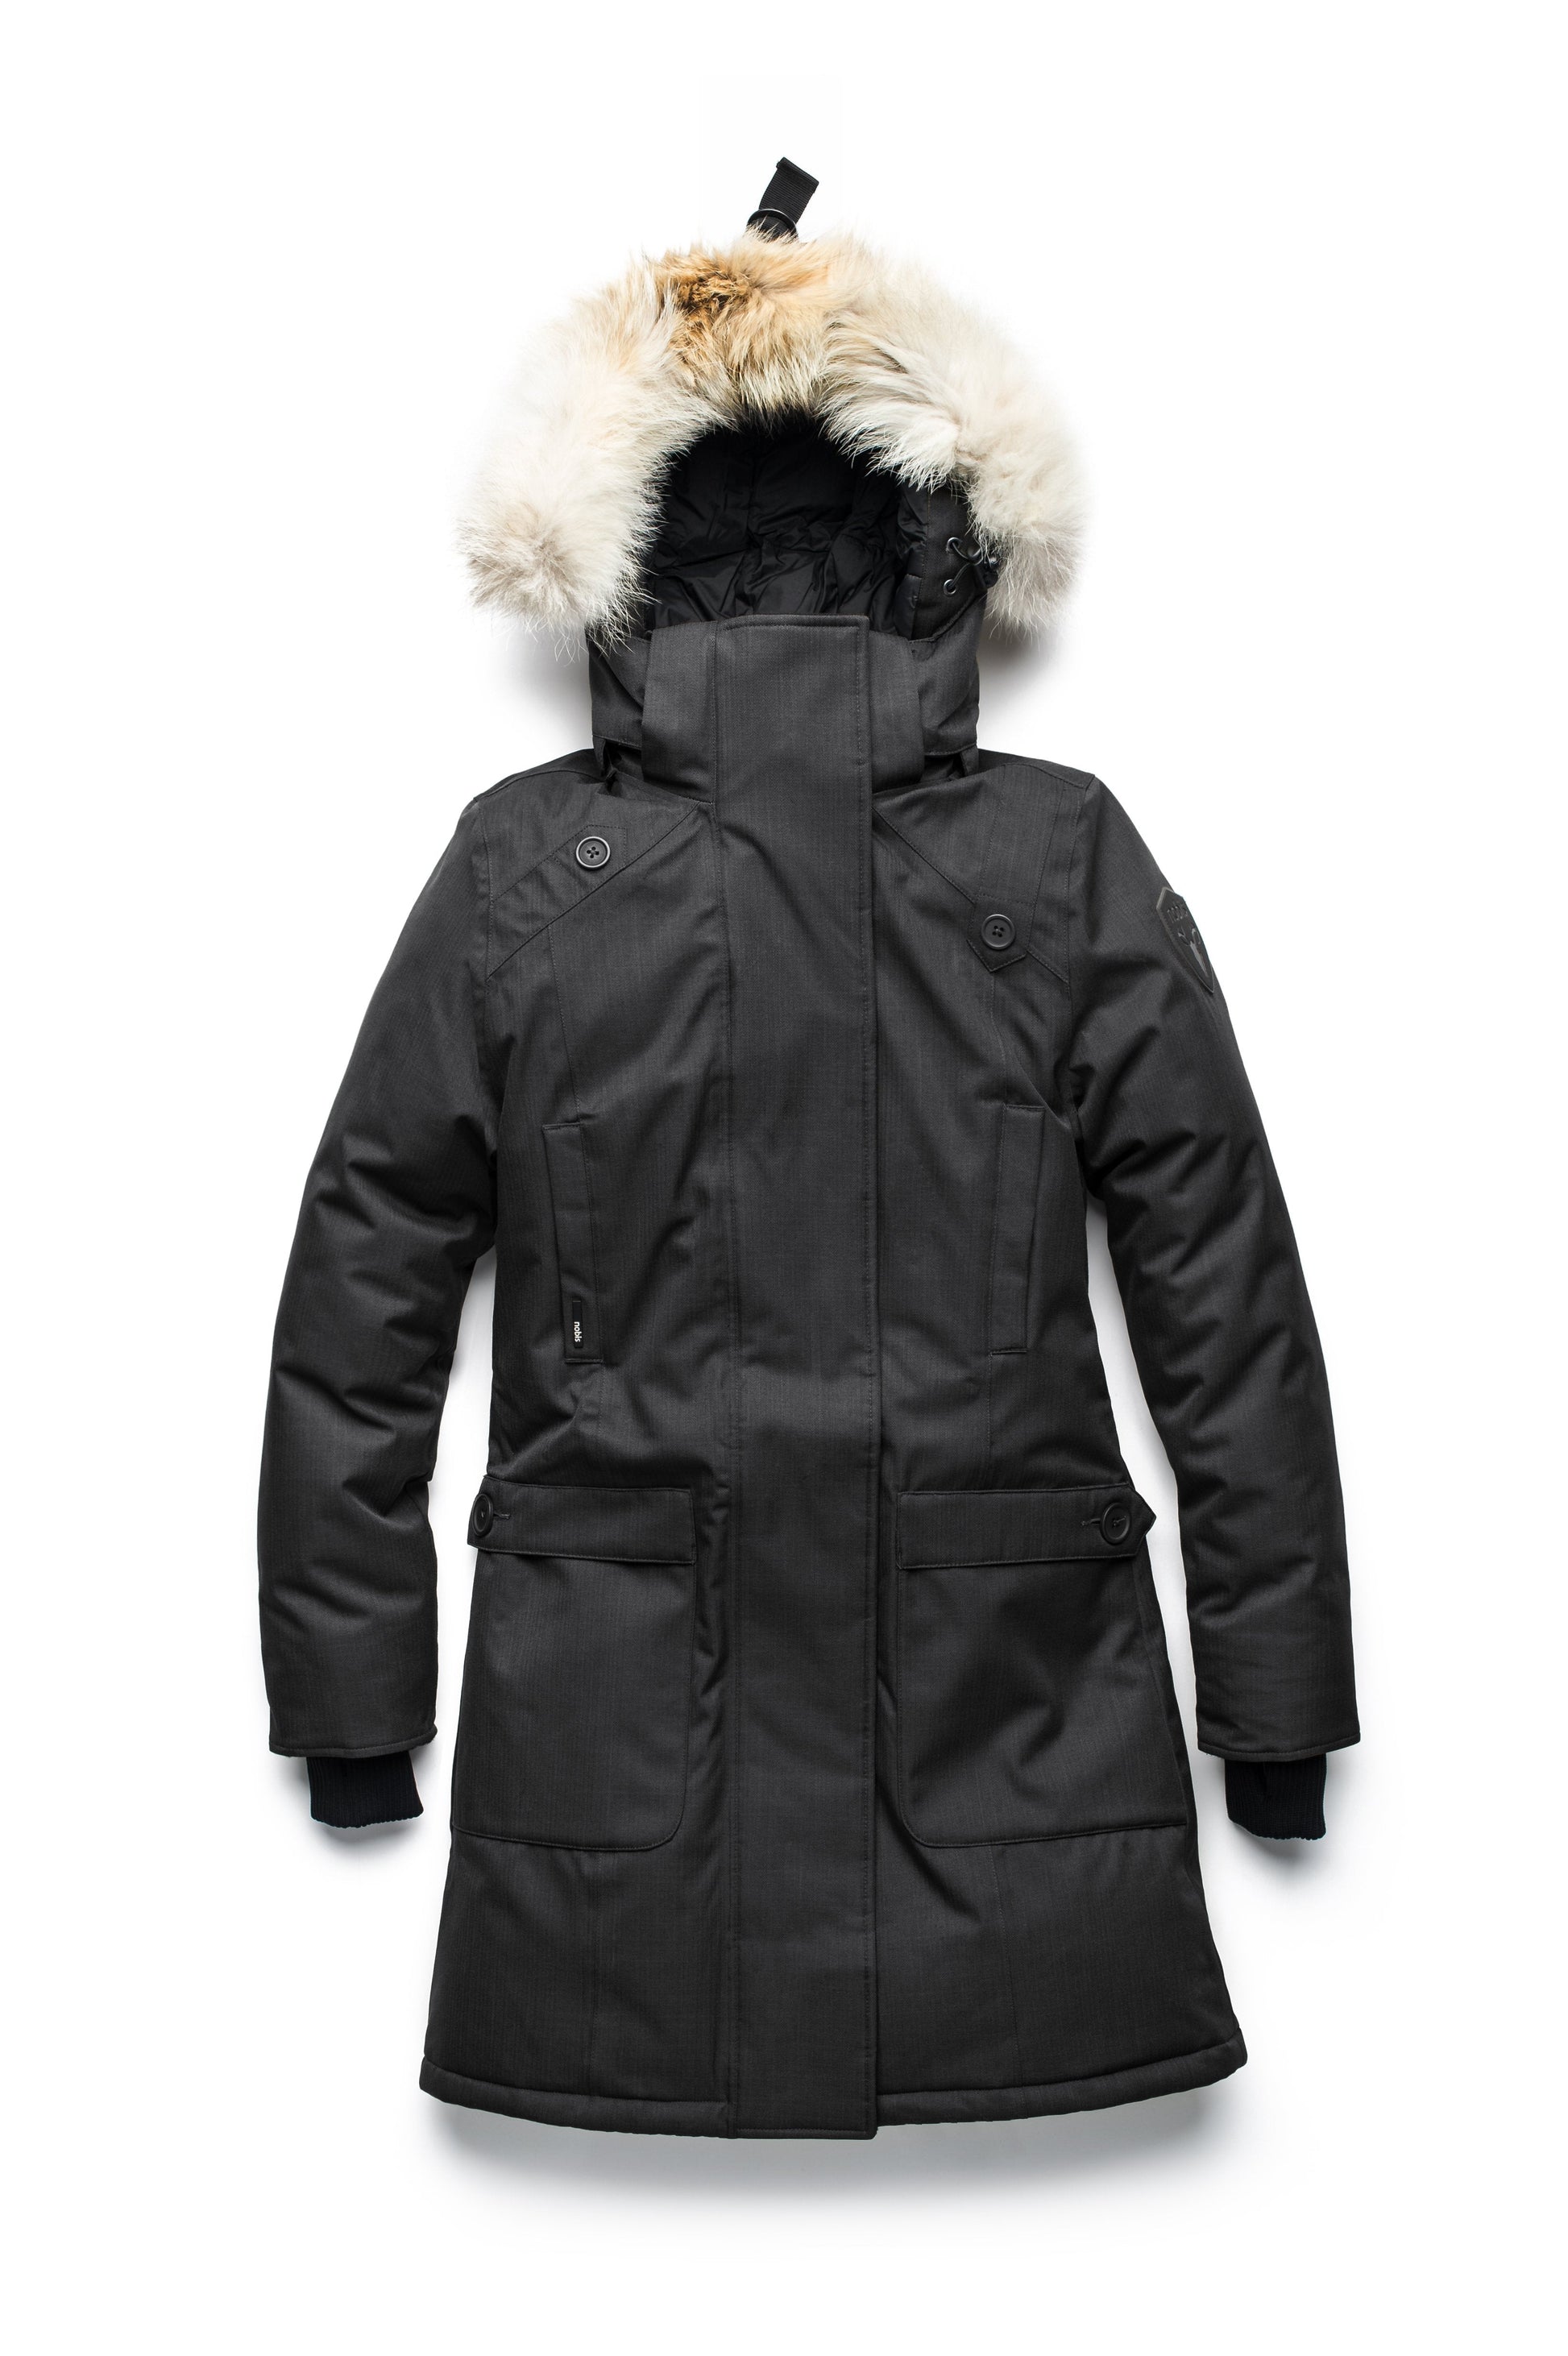 Best selling women's down filled knee length parka with removable down filled hood in CH Black